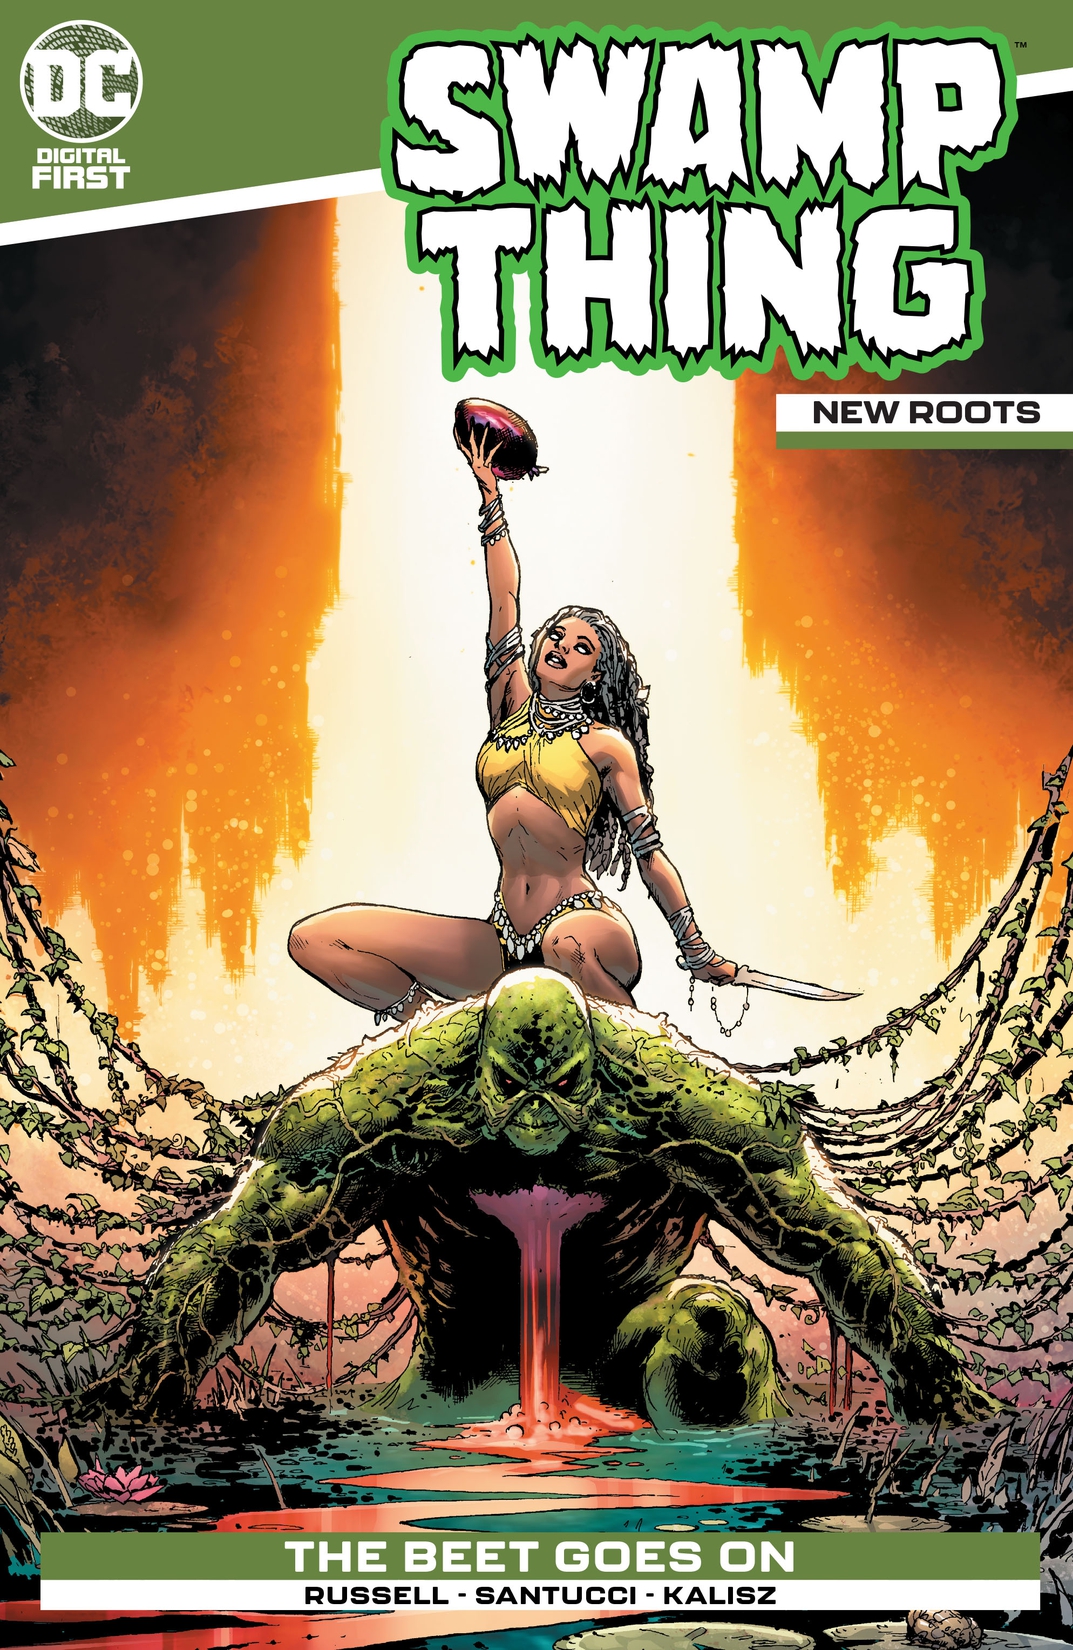 Swamp Thing: New Roots #1 preview images